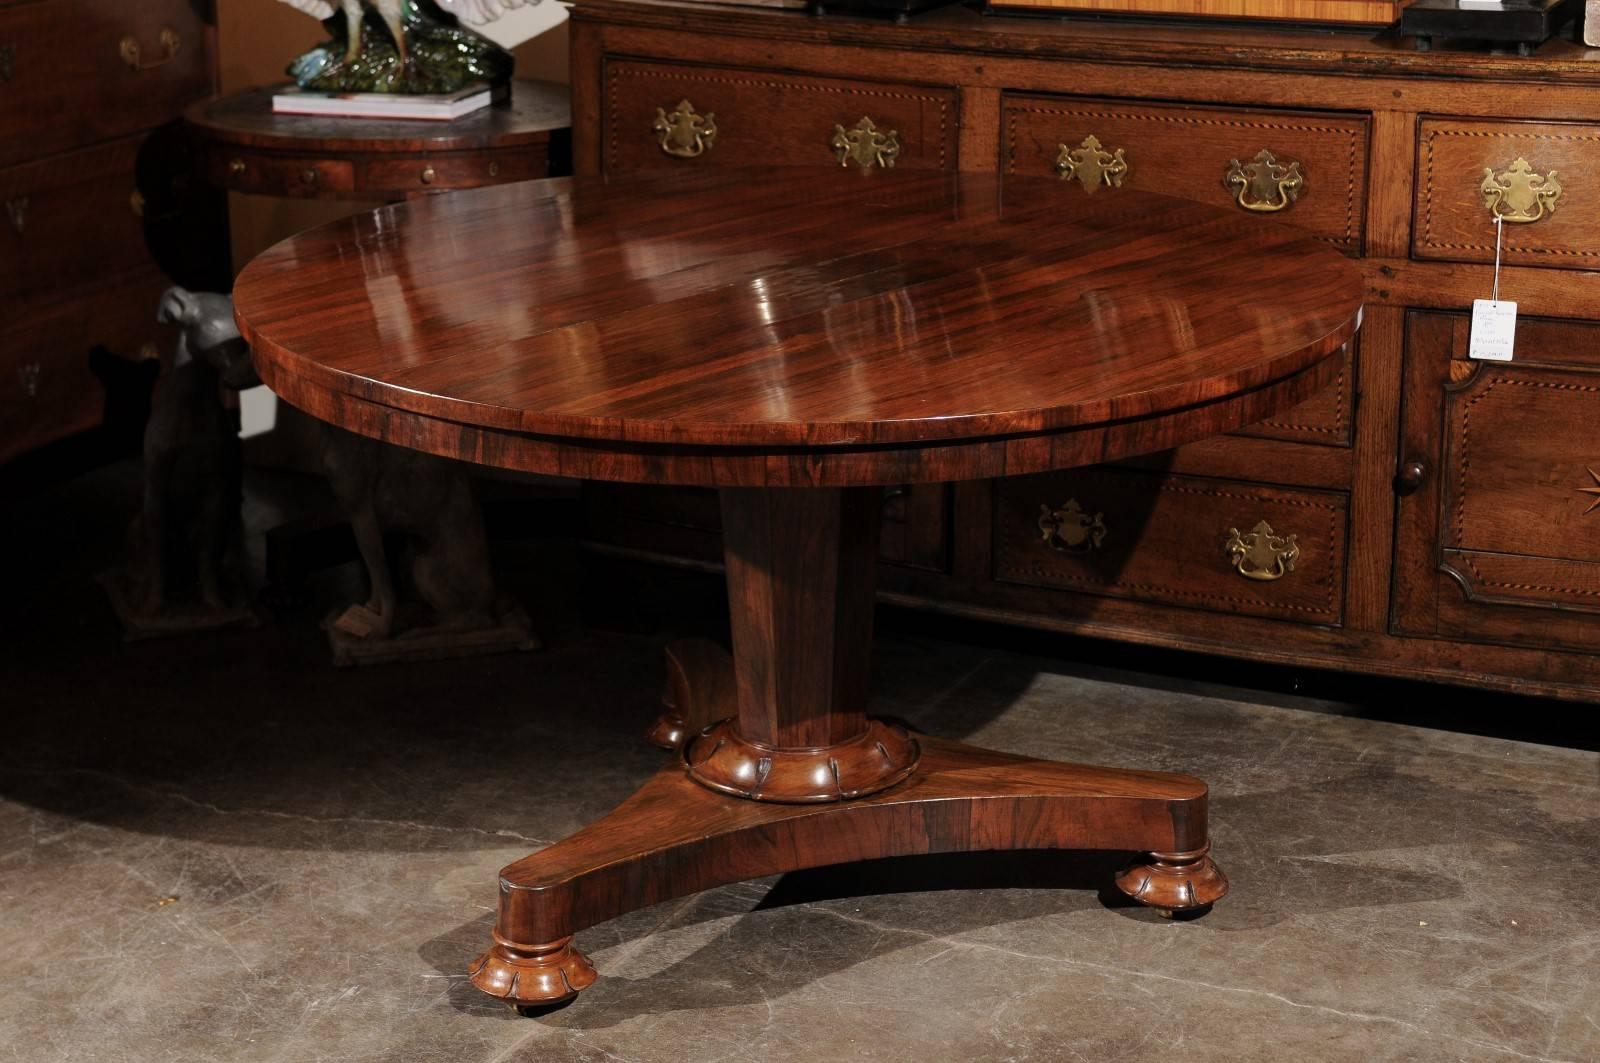 This English rosewood pedestal centre table from the mid-19th century features a stunning circular top, which tilts, over an elegant central tapered pedestal. The junction between the pedestal and the tripod base is decorated with a carved